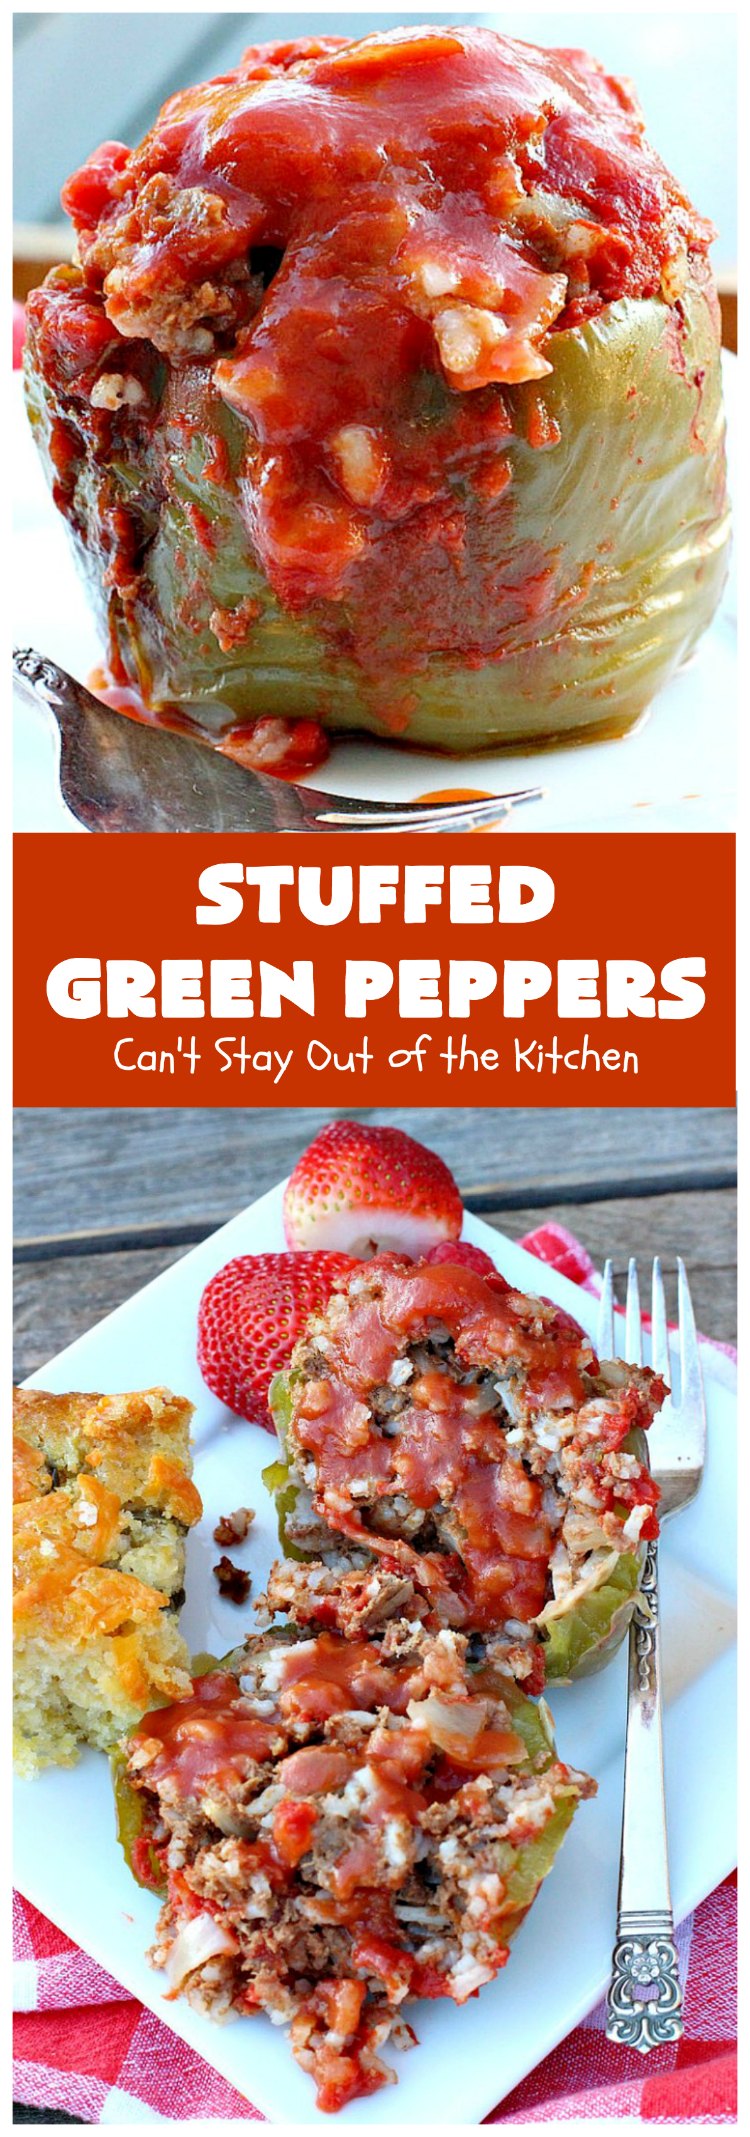 Stuffed Green Peppers | Can't Stay Out of the Kitchen | this delicious vintage #recipe is a family favorite. #BellPeppers are stuffed with #GroundBeef & #rice & covered with #TomatoSauce & a pinch of brown sugar.  The slightly sweet & savory taste is so mouthwatering. Delightful comfort food entree. #StuffedGreenPeppers #GlutenFree